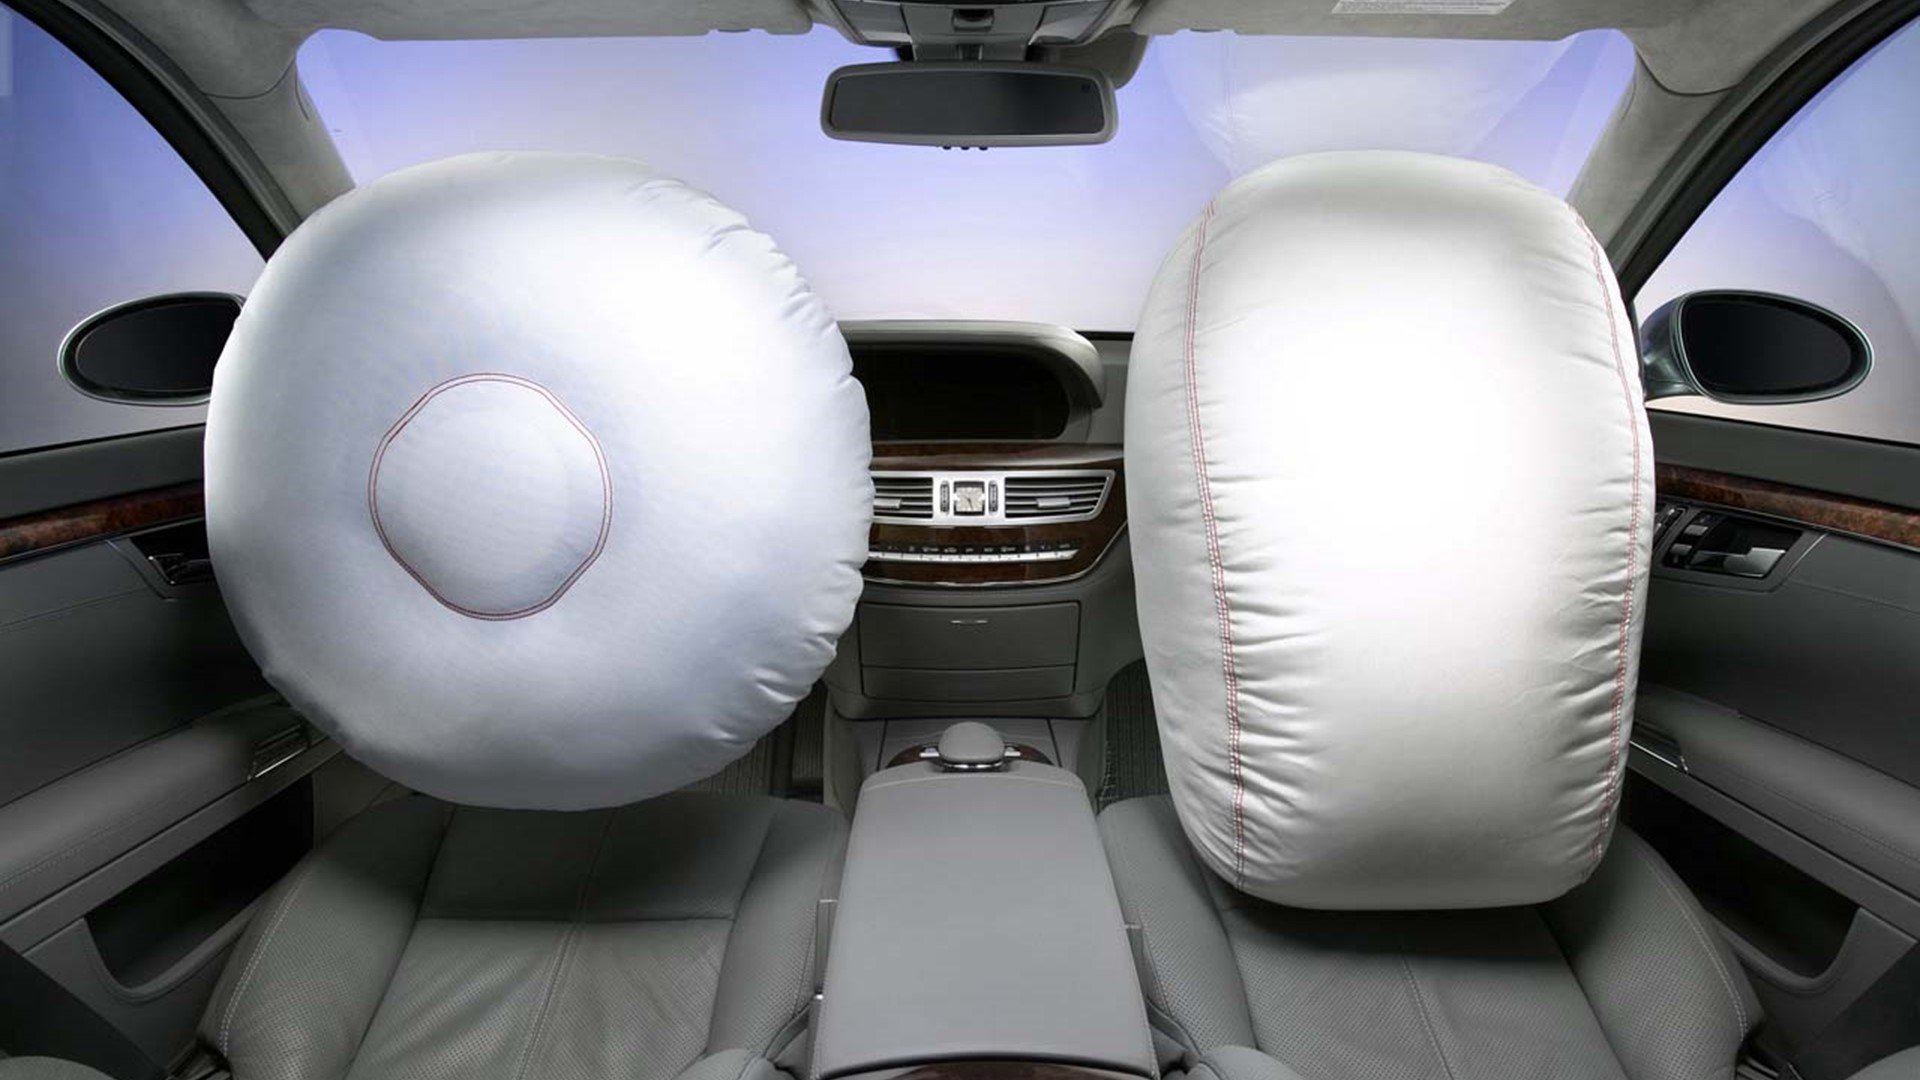 Recall of motor vehicles fitted with Takata airbags. Omnisure